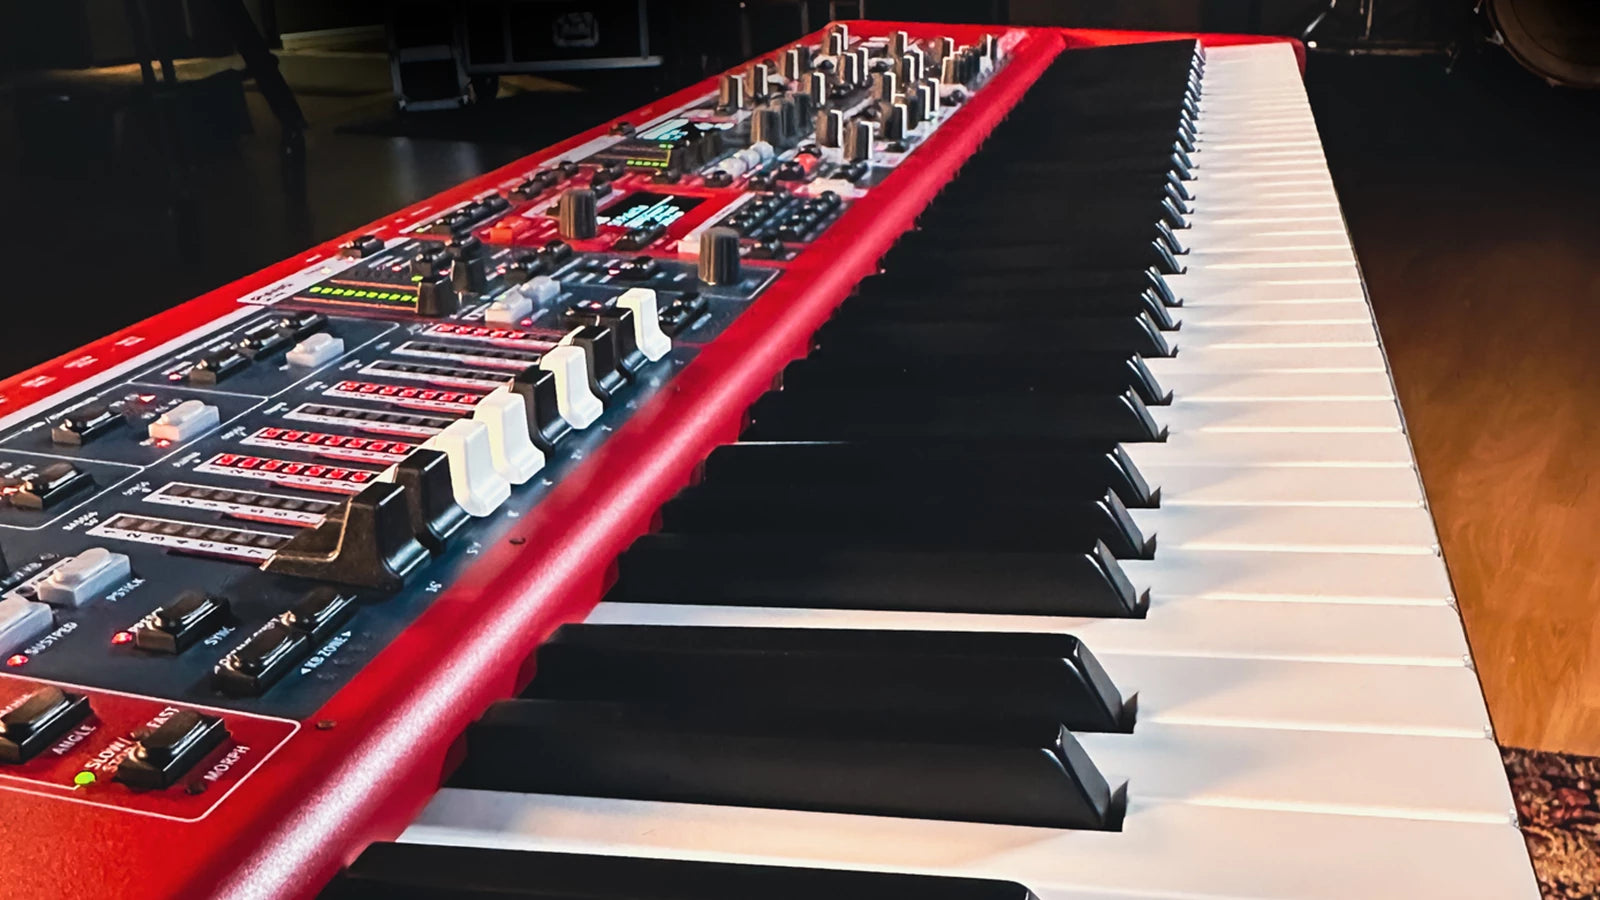 Stylish view of a stage piano keyboard